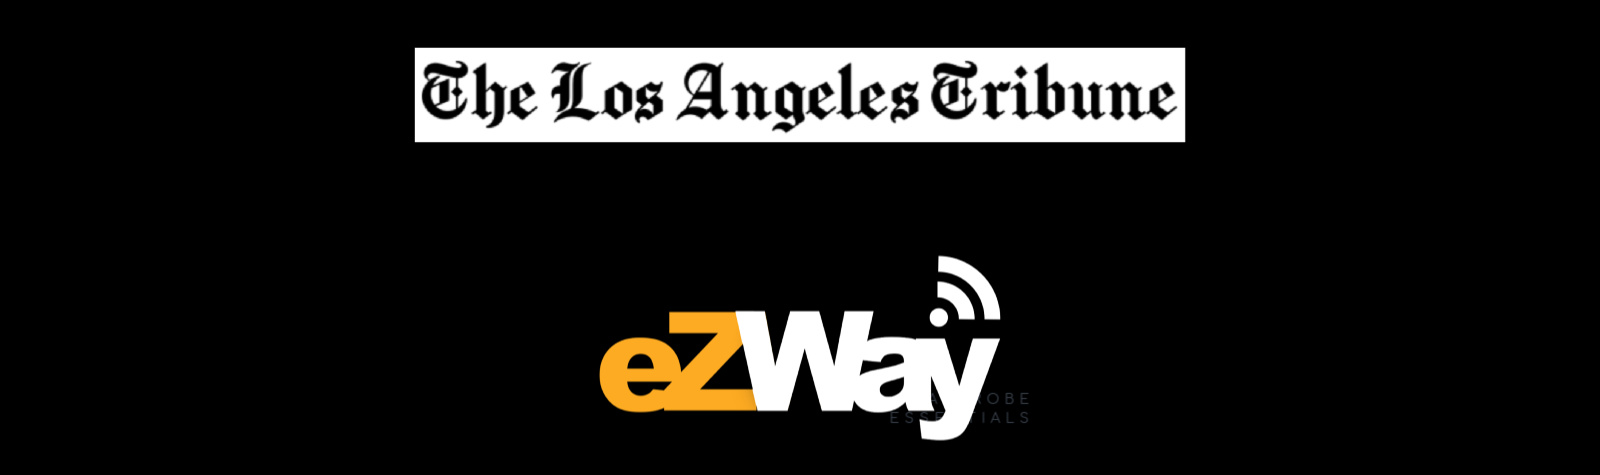 eZWay Wall of Fame Joins Forces with The Los Angeles Tribune